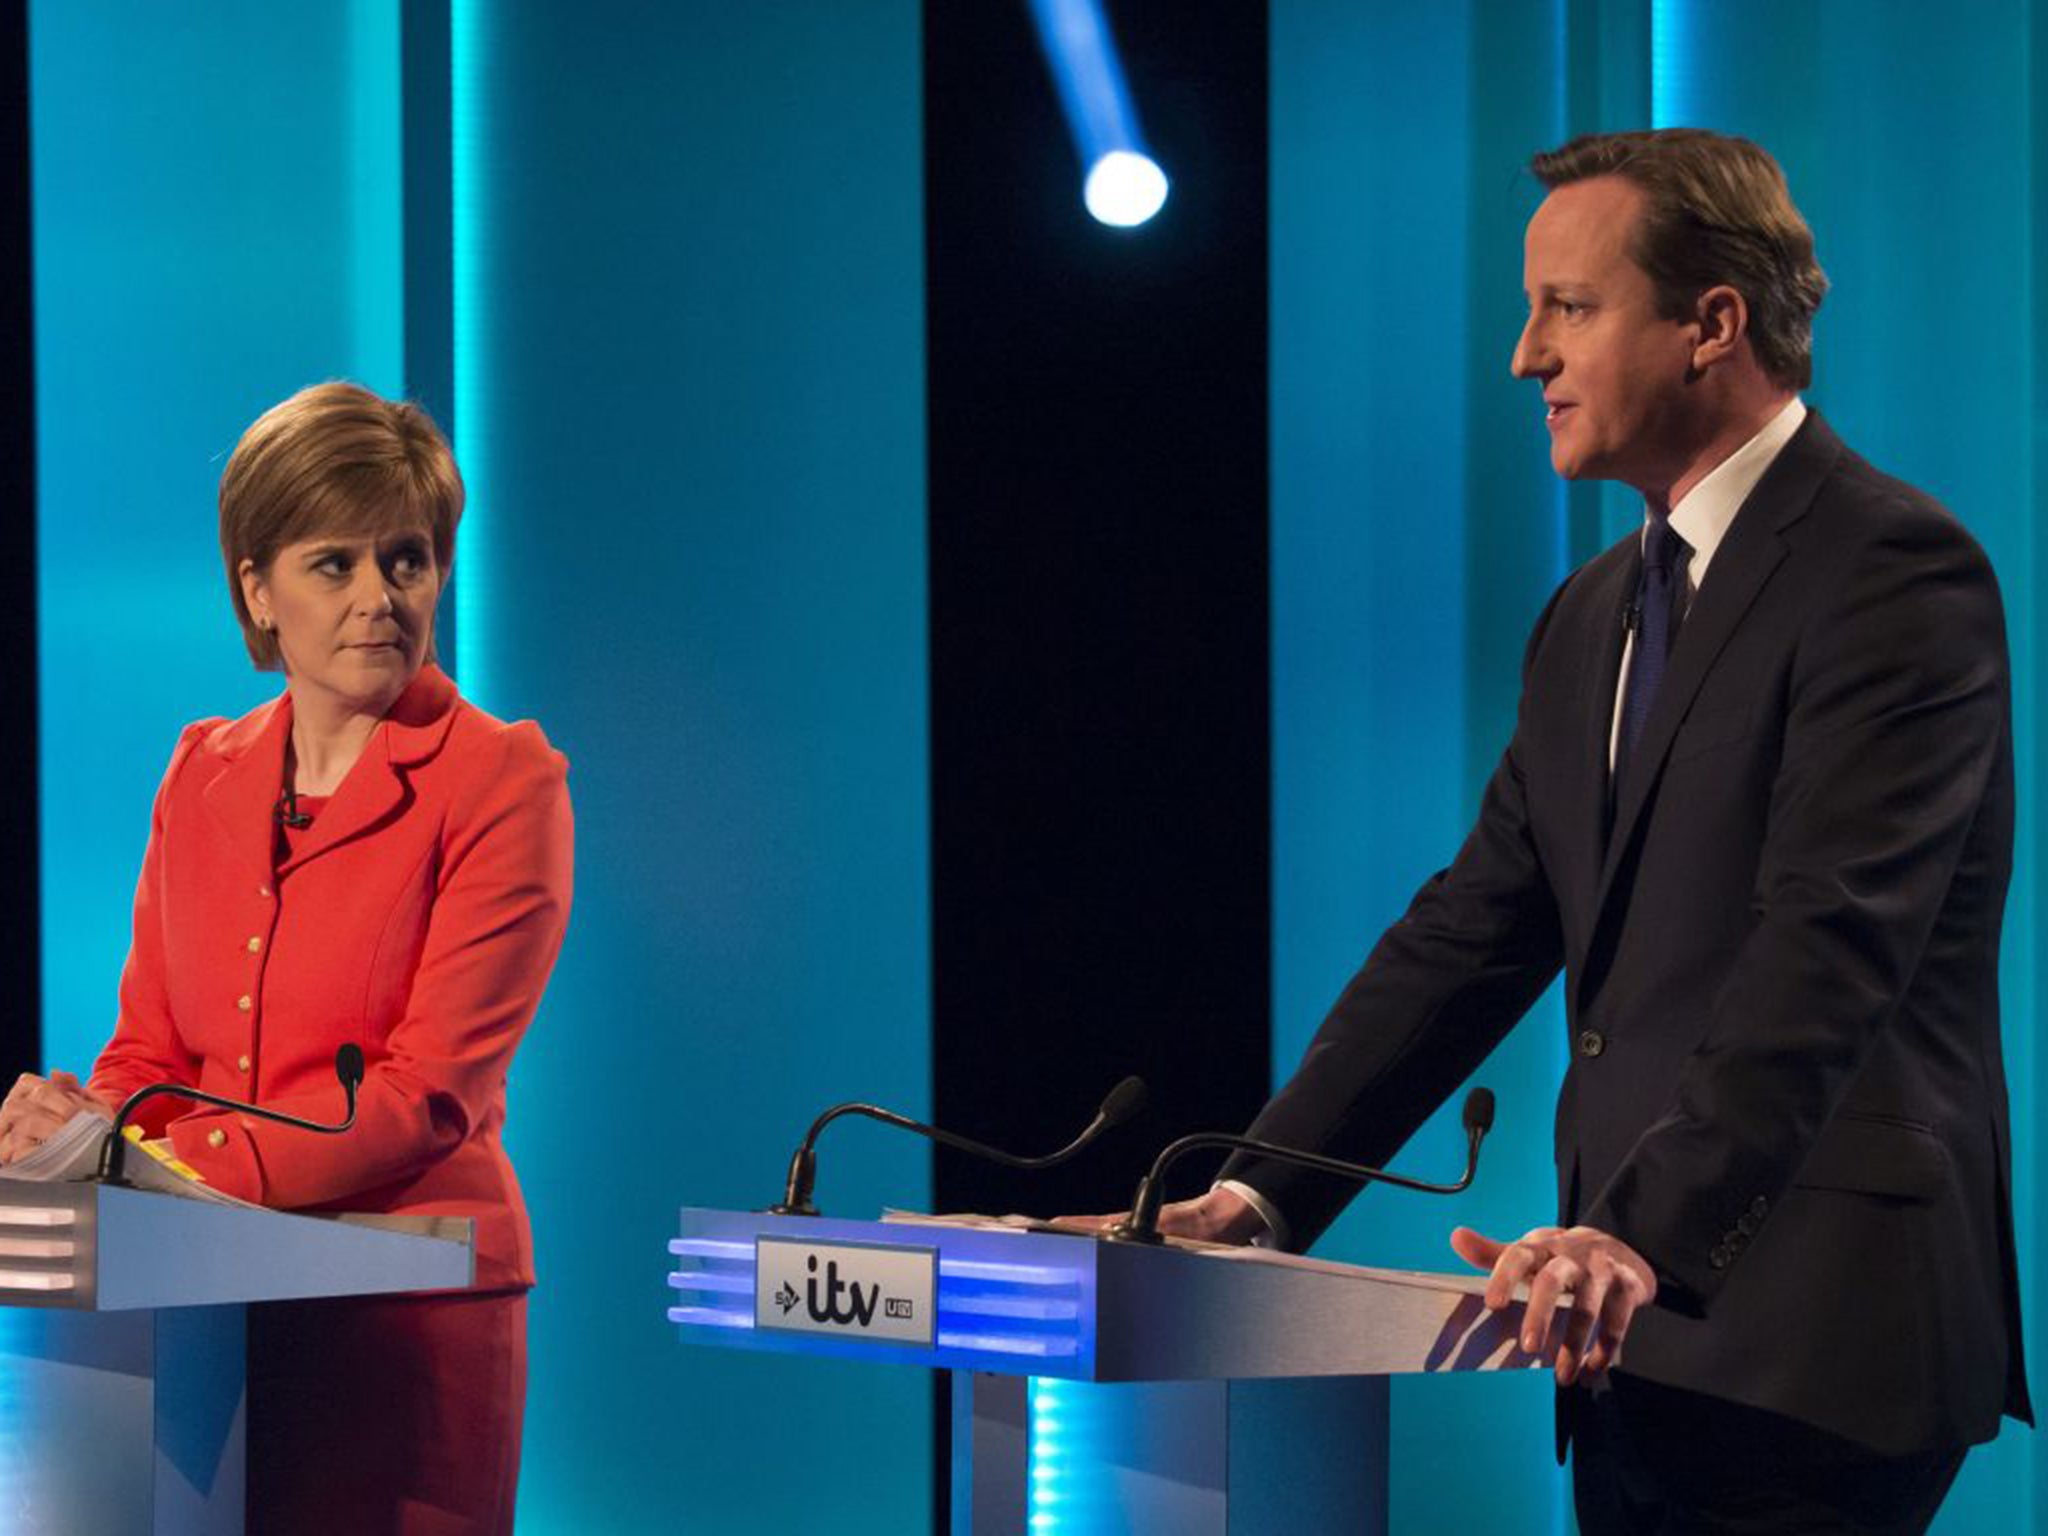 Nicola Sturgeon could have considerable influence over David Cameron in a hung parliament